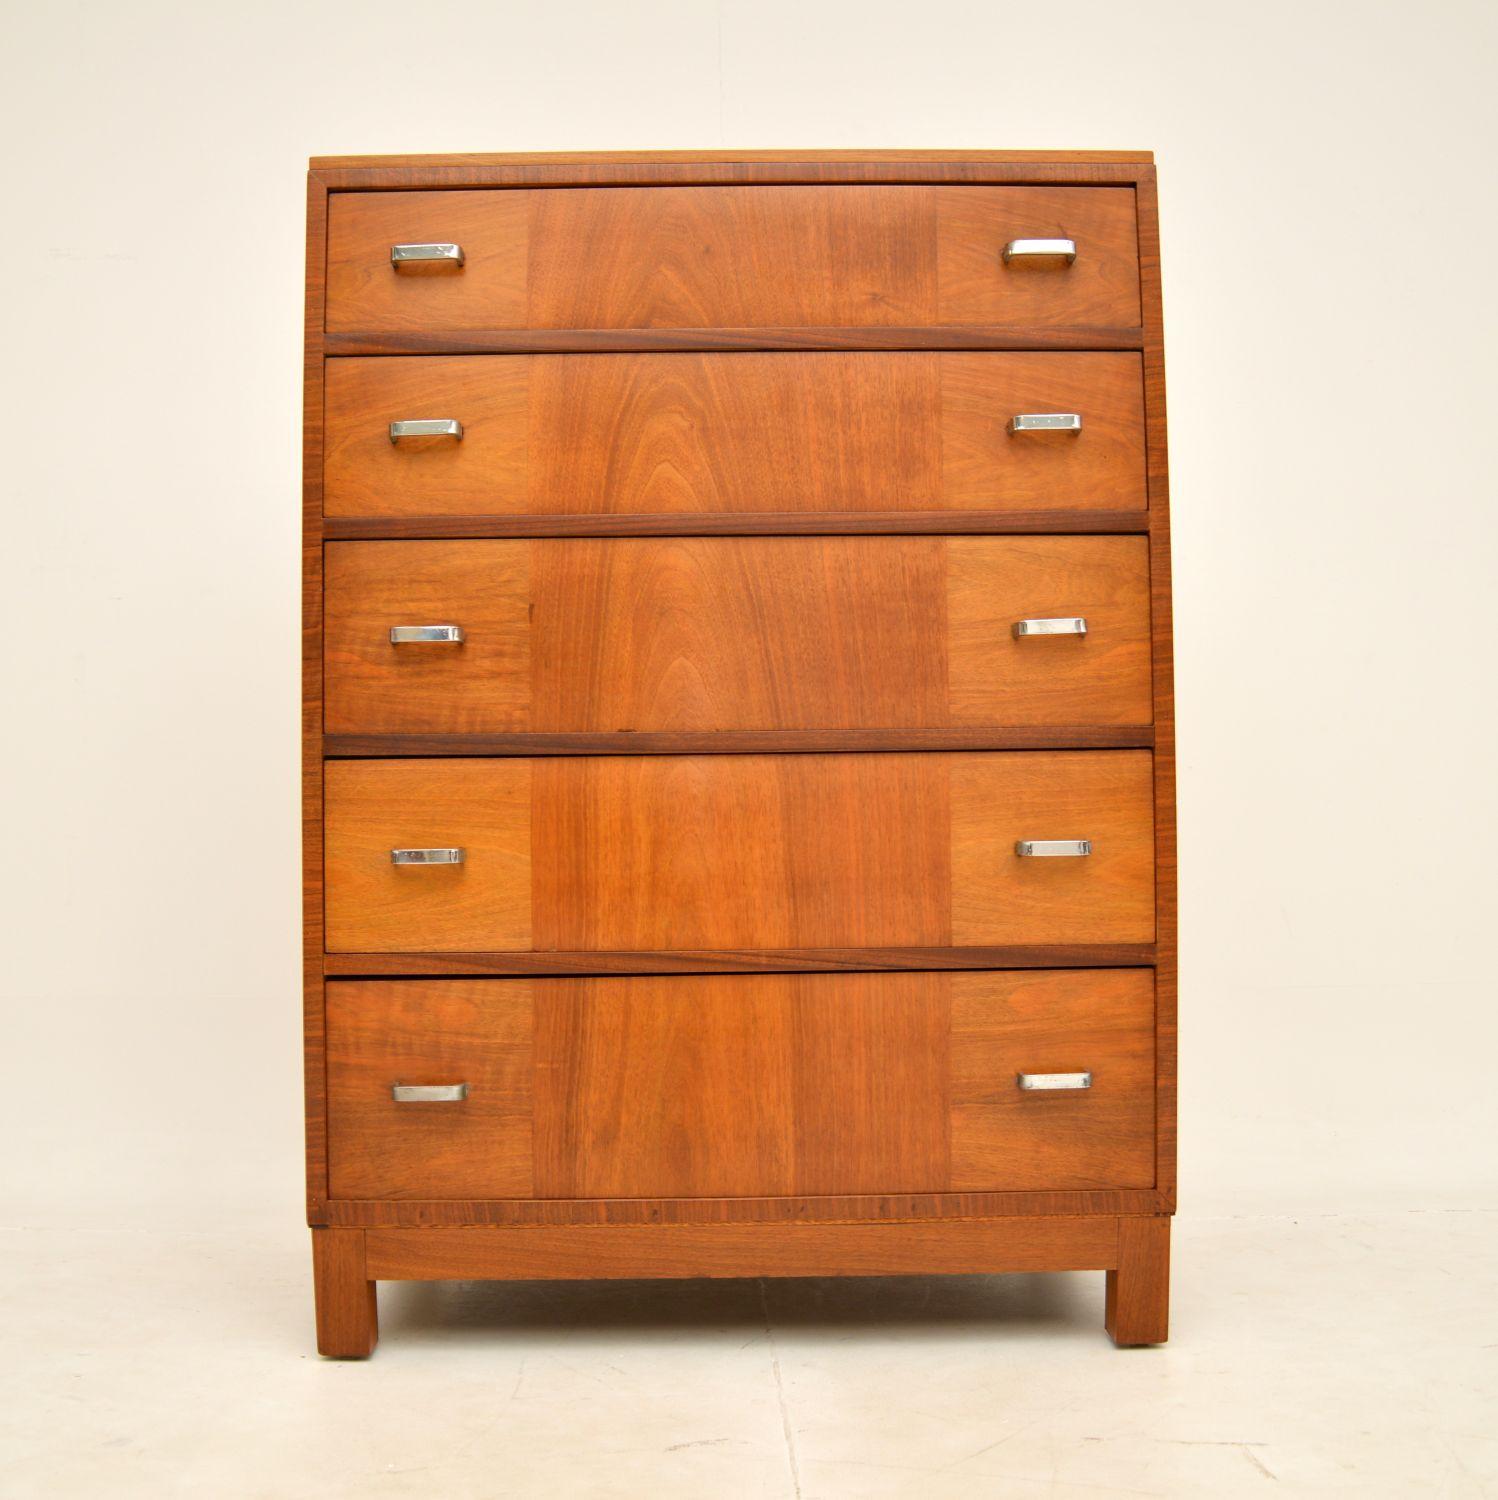 A stylish and extremely well made Art Deco period chest of drawers. This was made by and retailed in Heal’s in the 1920-30’s.

The quality is exceptional, with a very solid construction and gorgeous walnut grain patterns. There is lots of storage